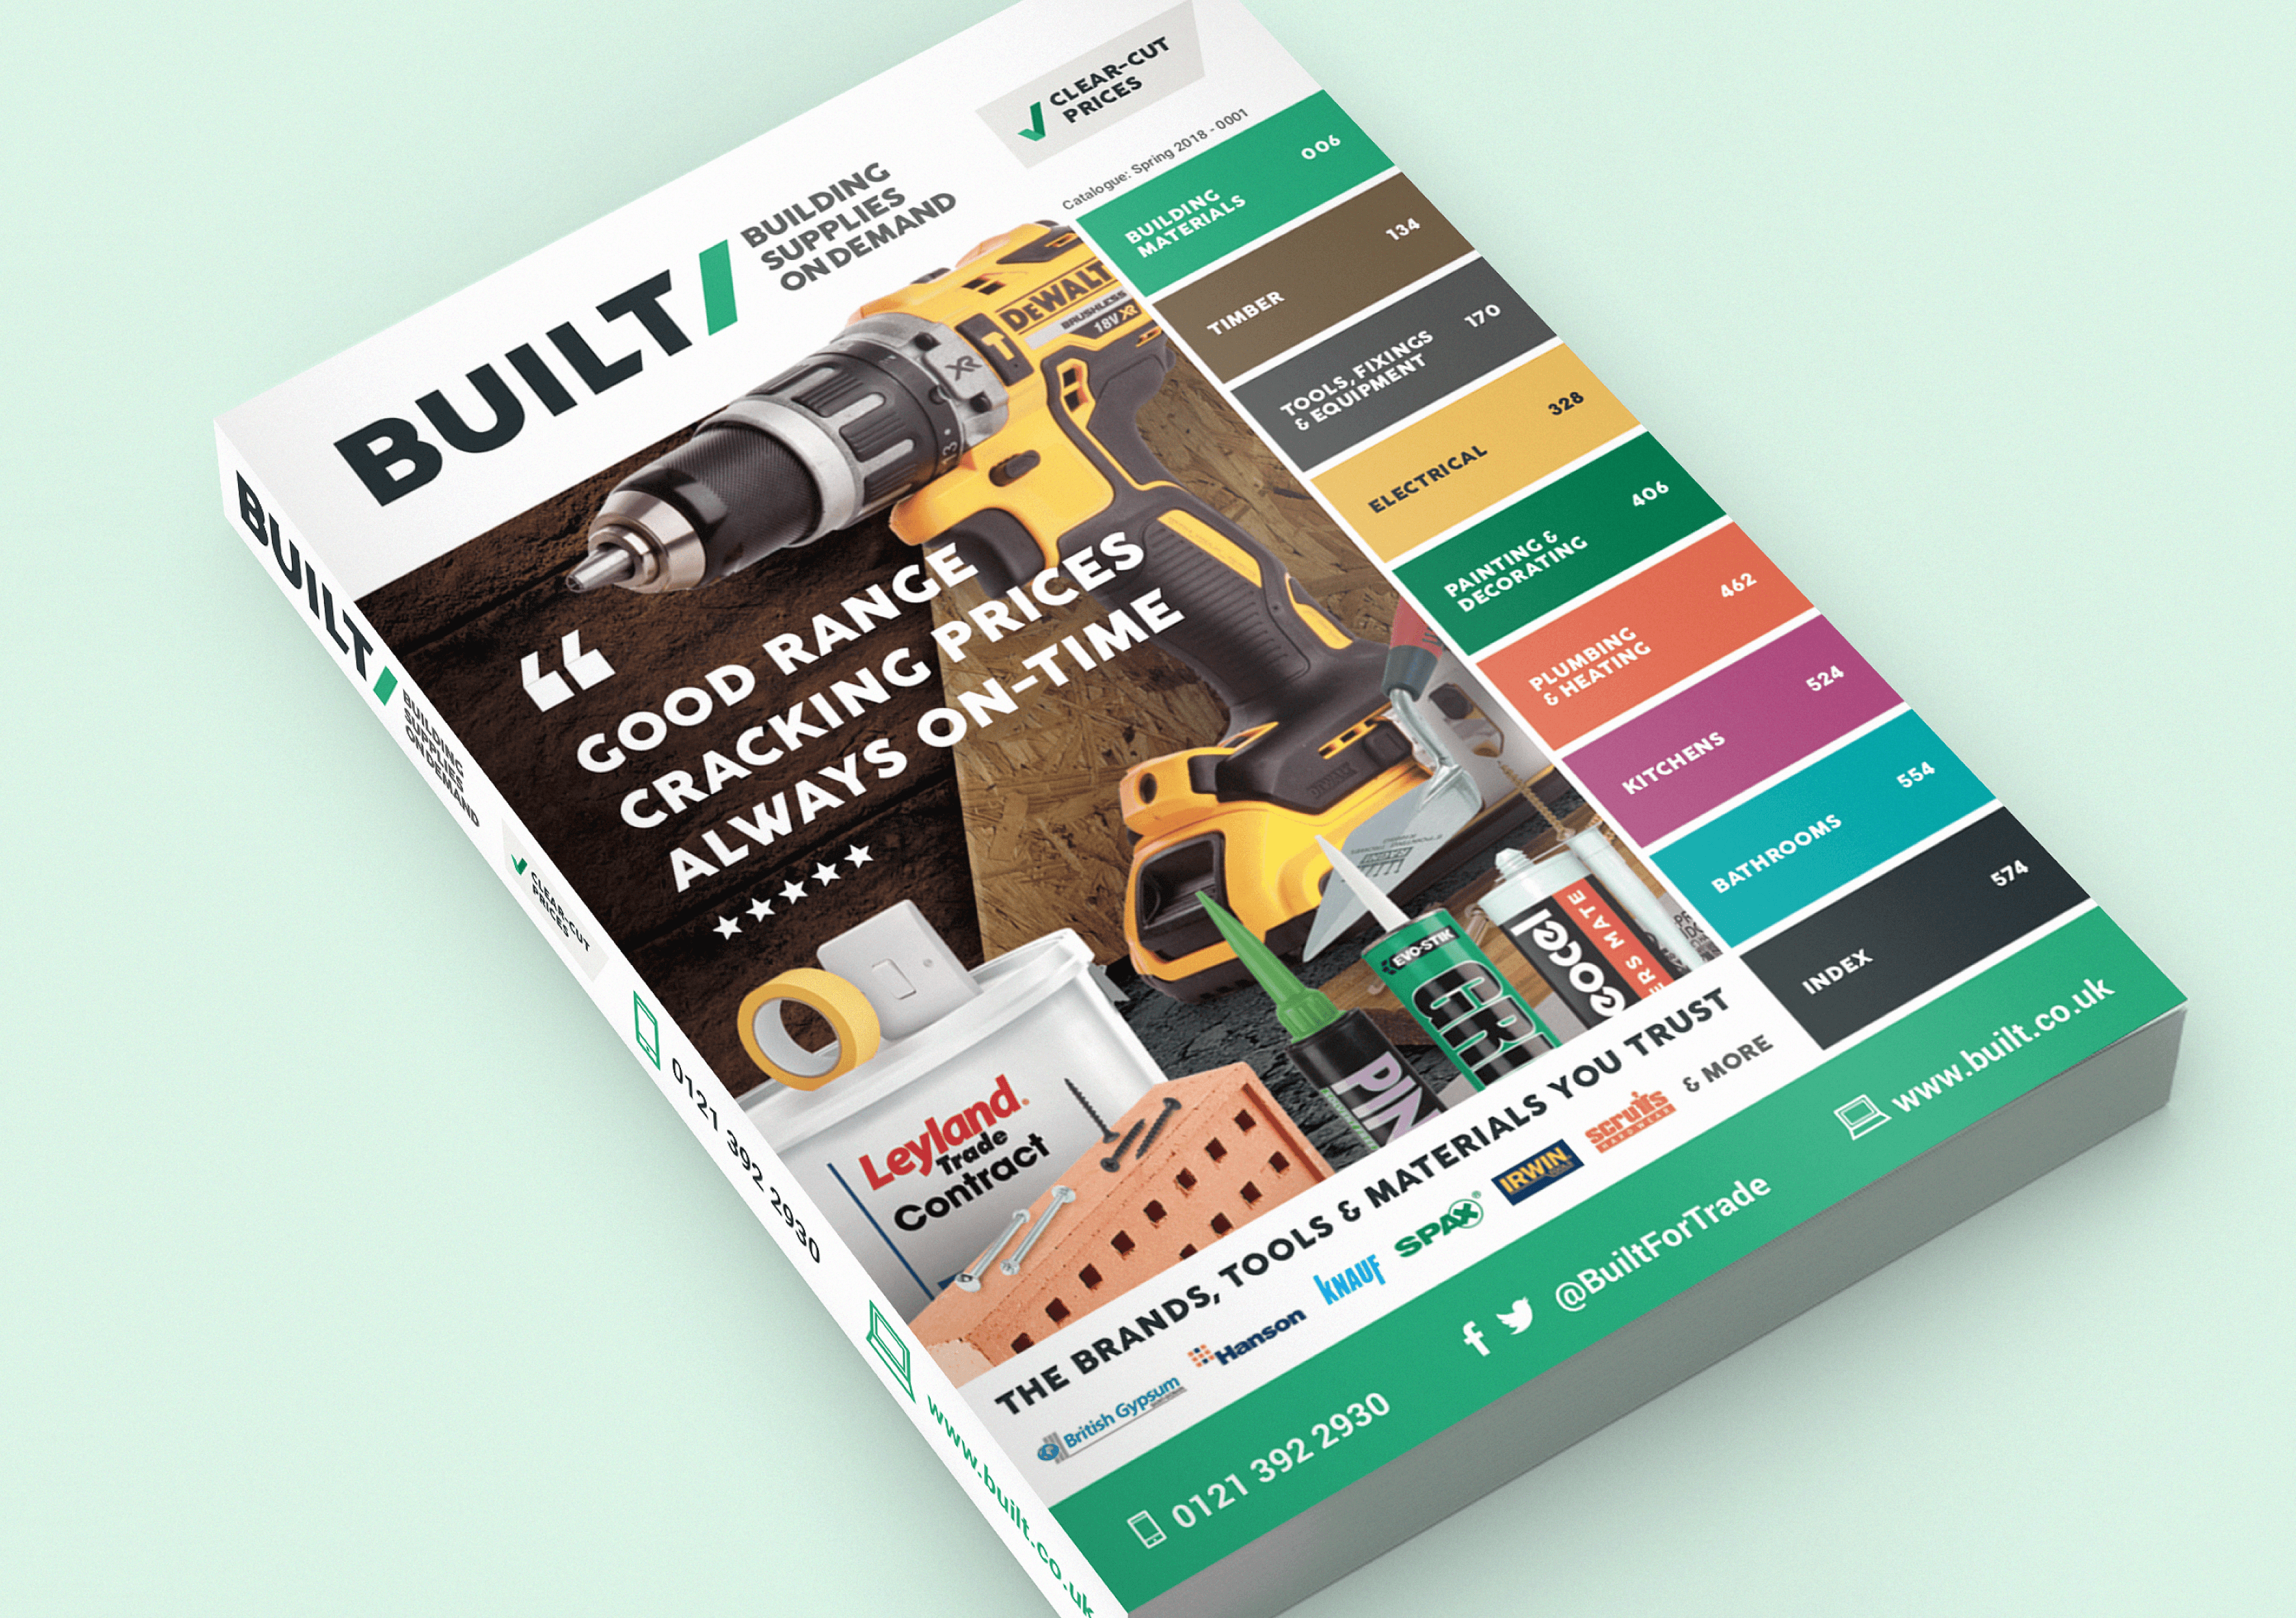 Built builders merchant product range catalogue book sitting on a green surface with visible cover